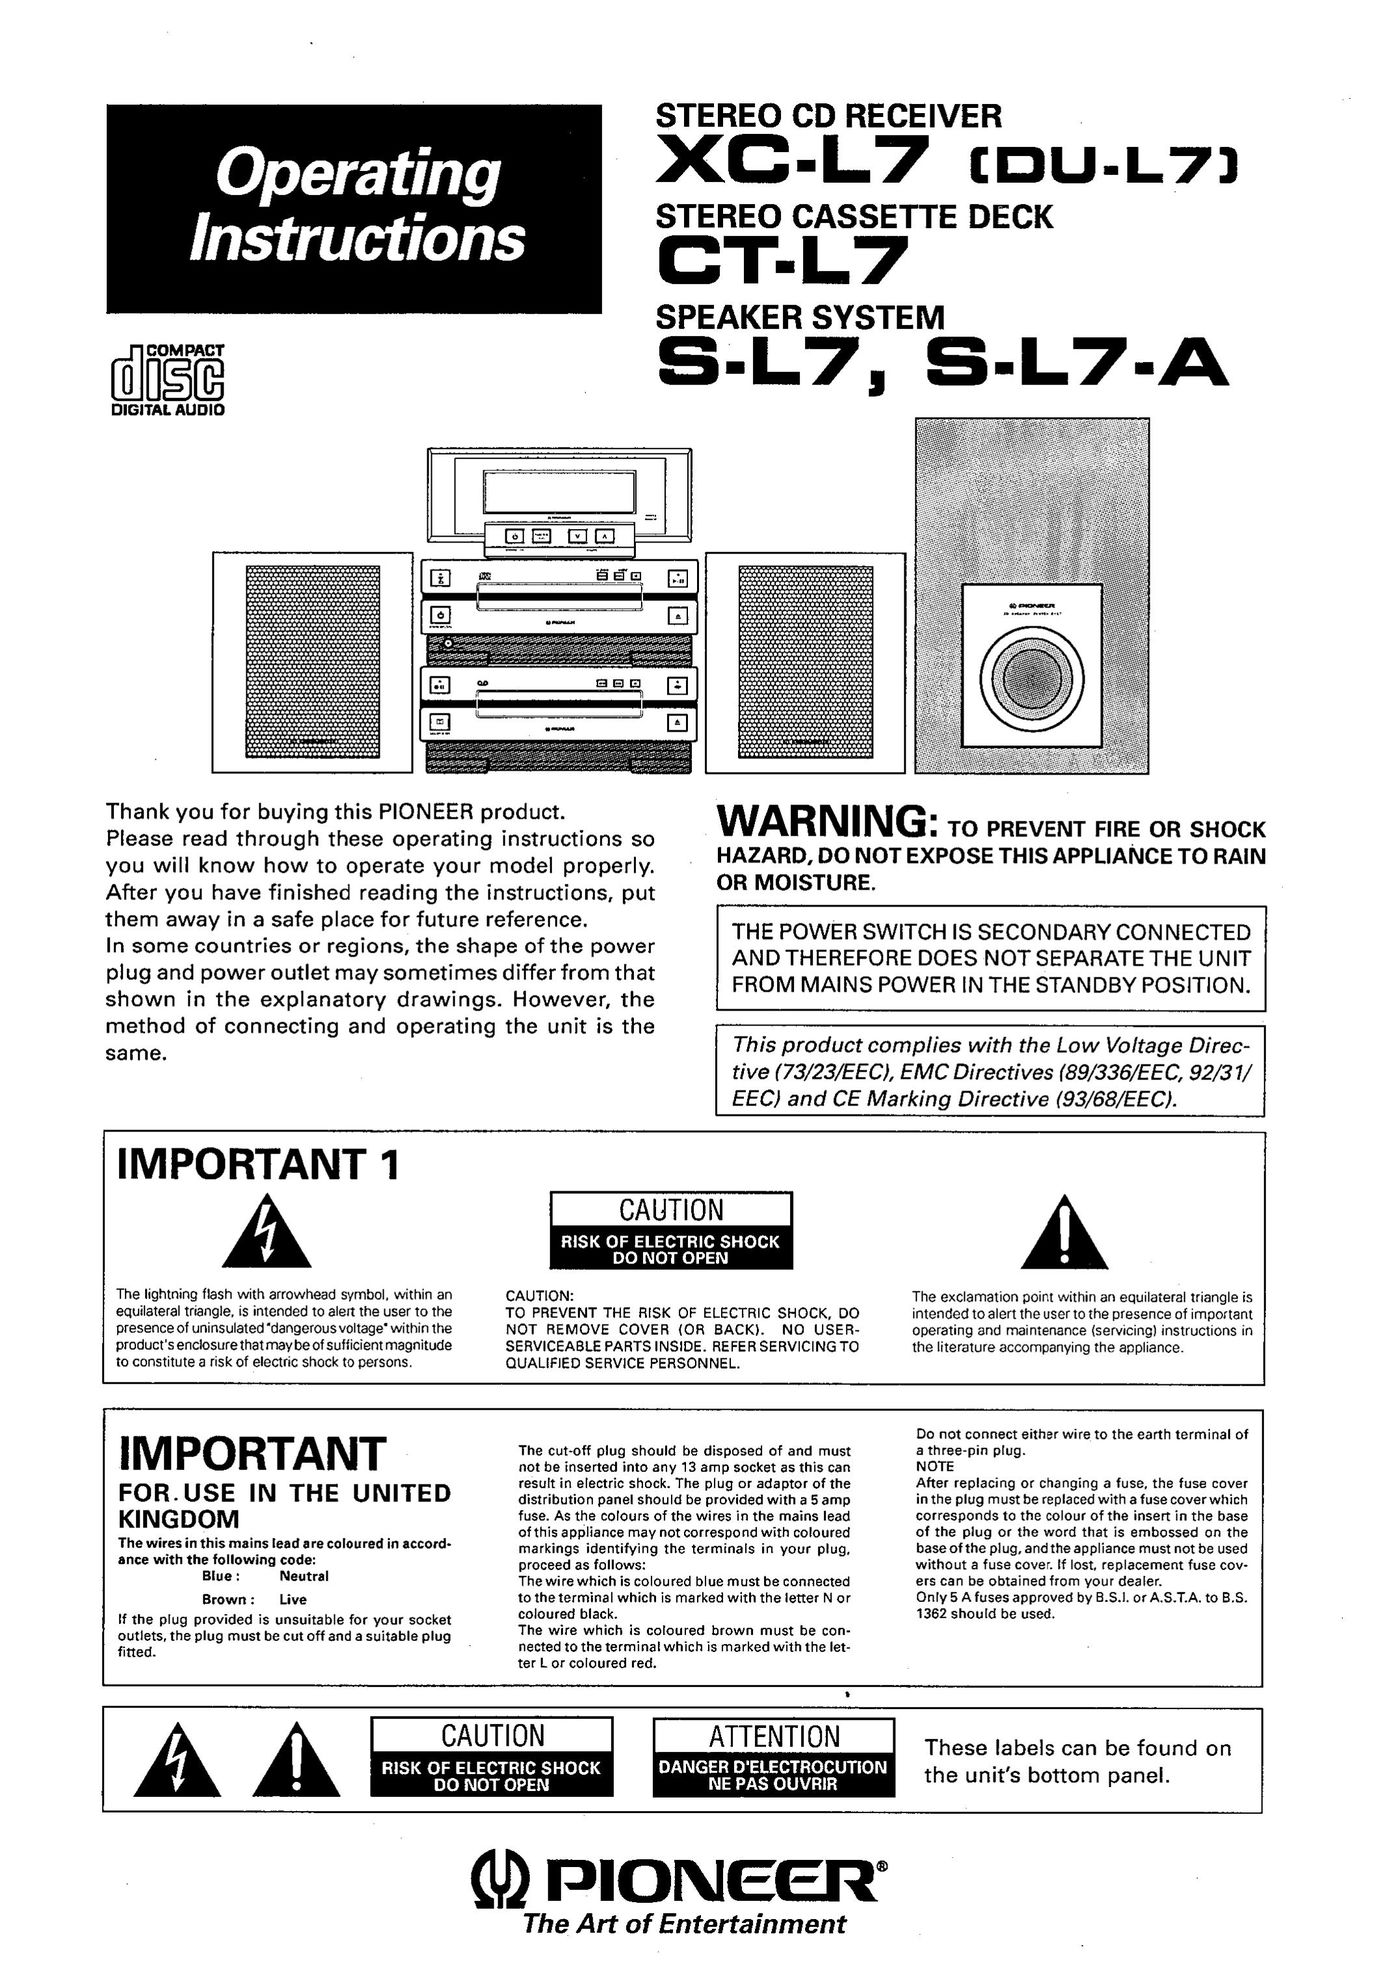 Pioneer CTL7 Home Theater System User Manual